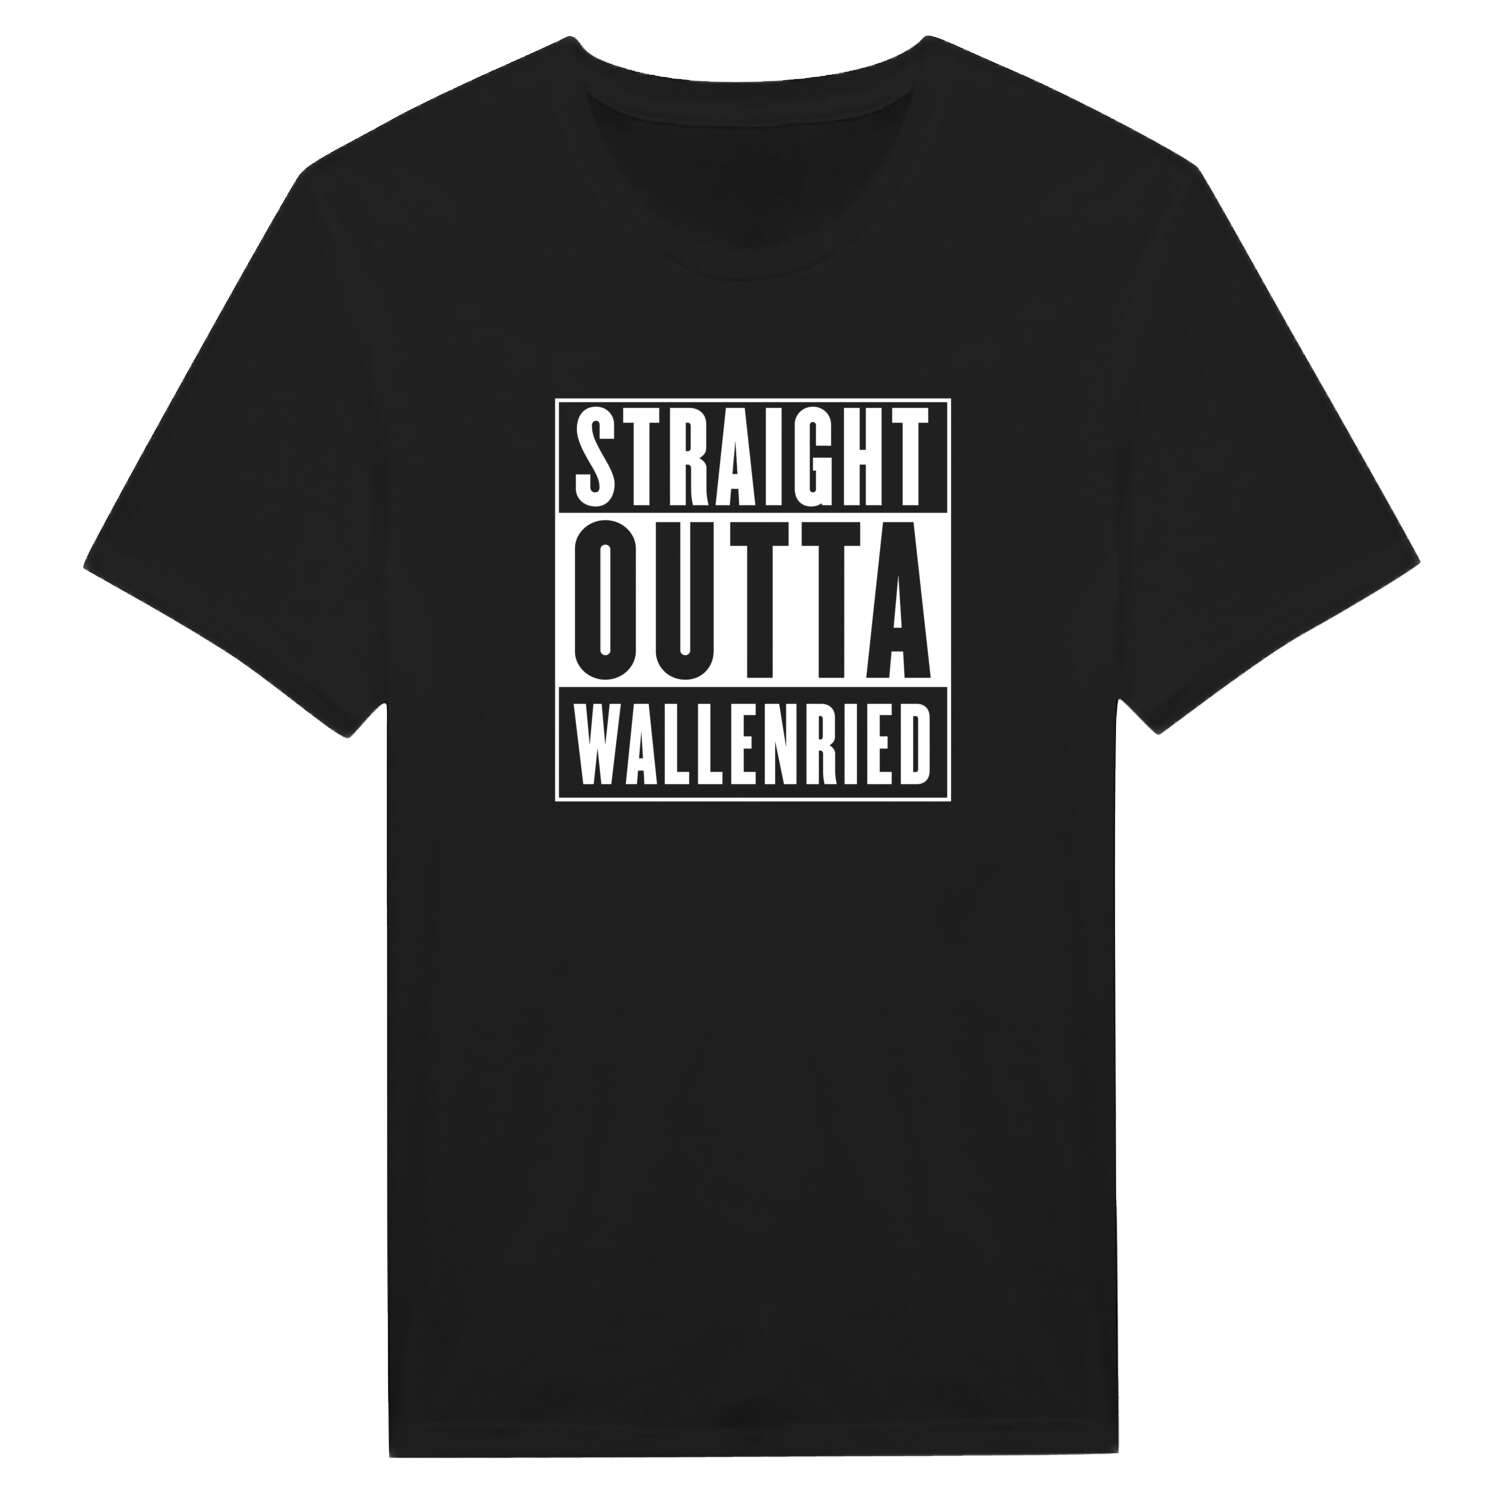 Wallenried T-Shirt »Straight Outta«